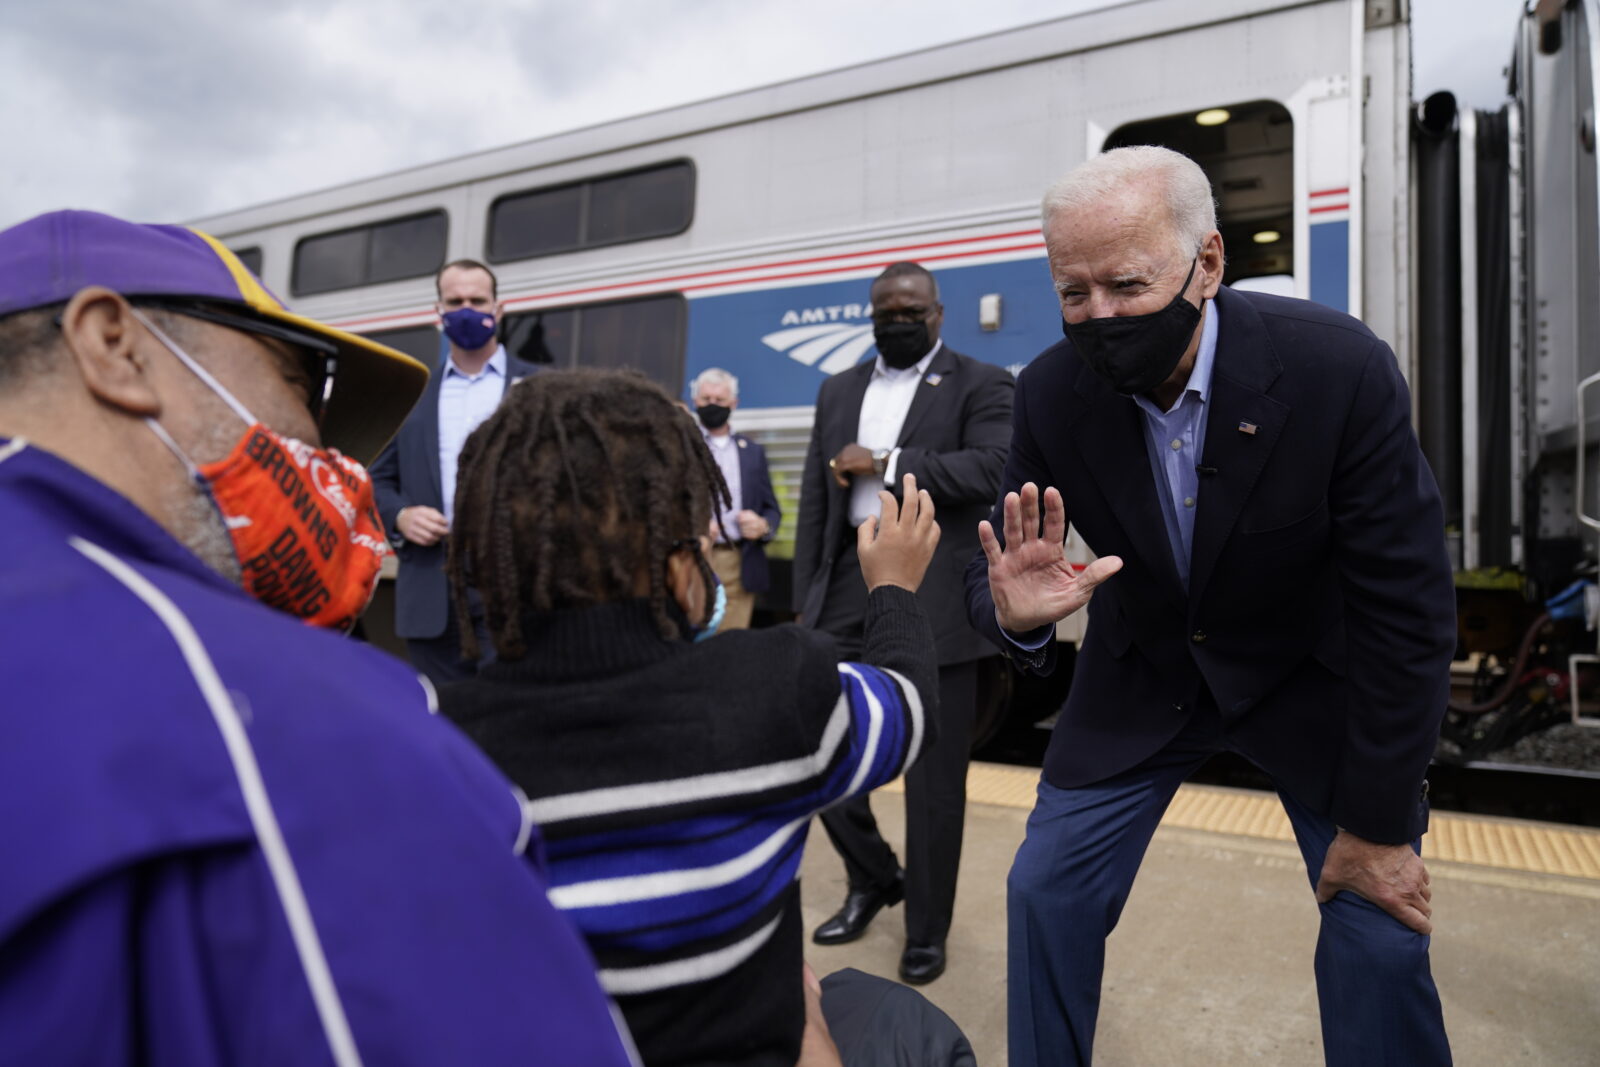 Supporters greet Democratic presidential candidate former Vice President Joe Biden as he steps of the train at Amtrak's Alliance Train Station, Wednesday, Sept. 30, 2020, in Alliance, Ohio. Biden is on a train tour through Ohio and Pennsylvania today. (AP Photo/Andrew Harnik)